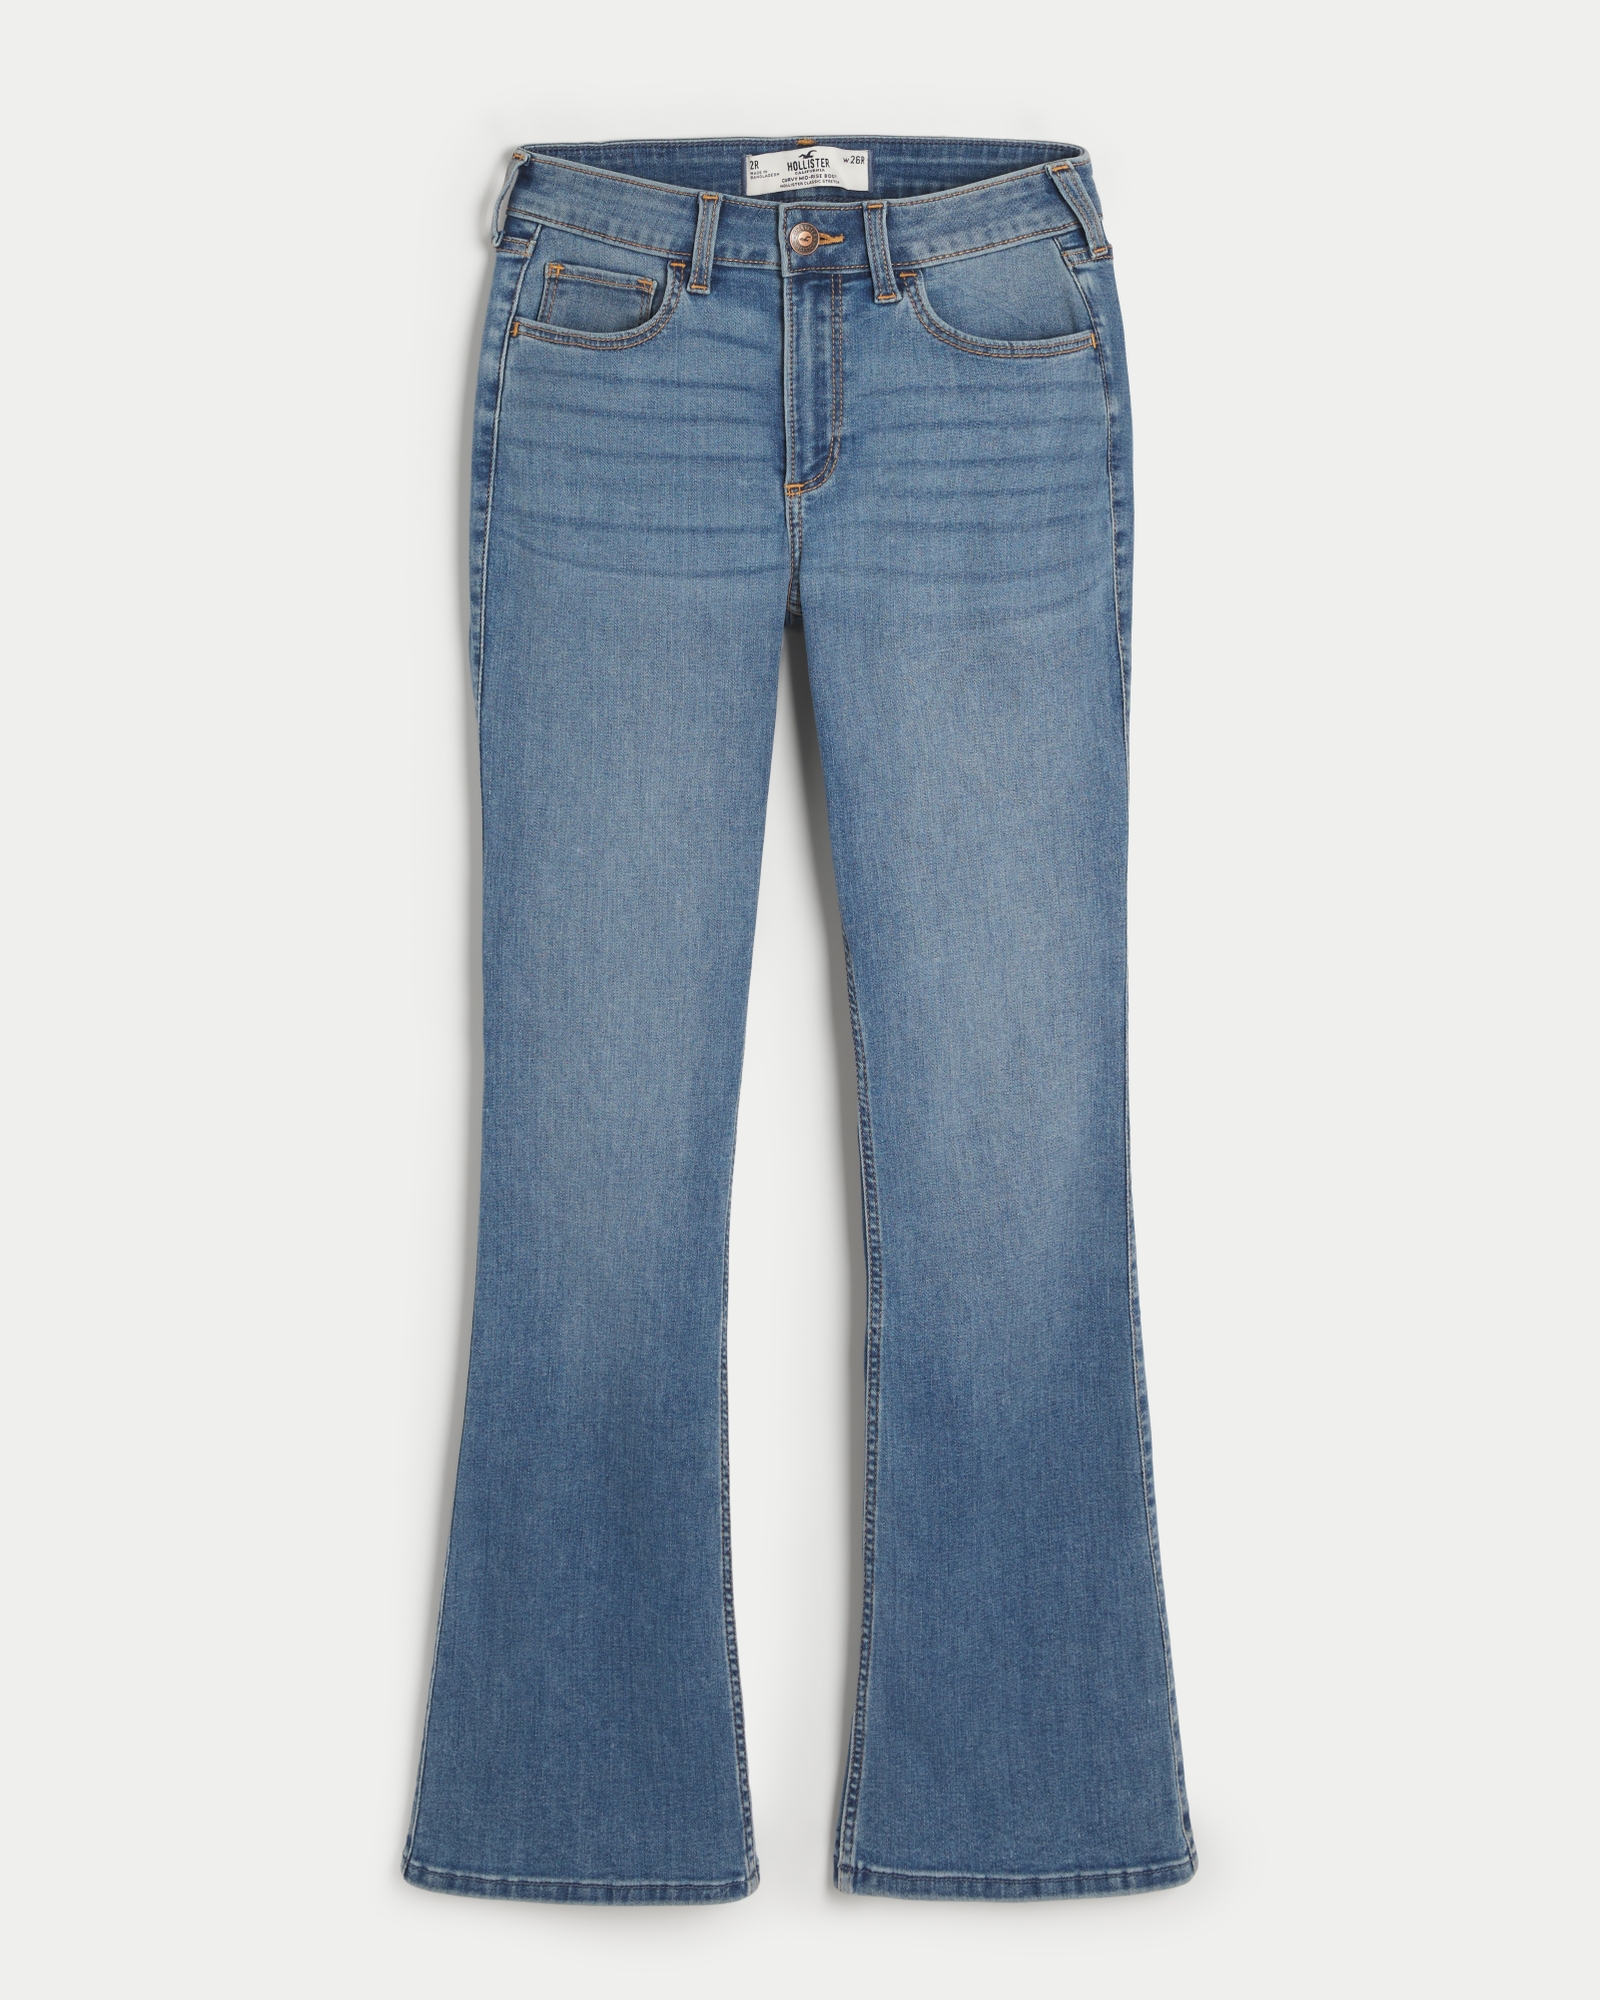 https://img.hollisterco.com/is/image/anf/KIC_355-3423-0009-278_prod1.jpg?policy=product-extra-large